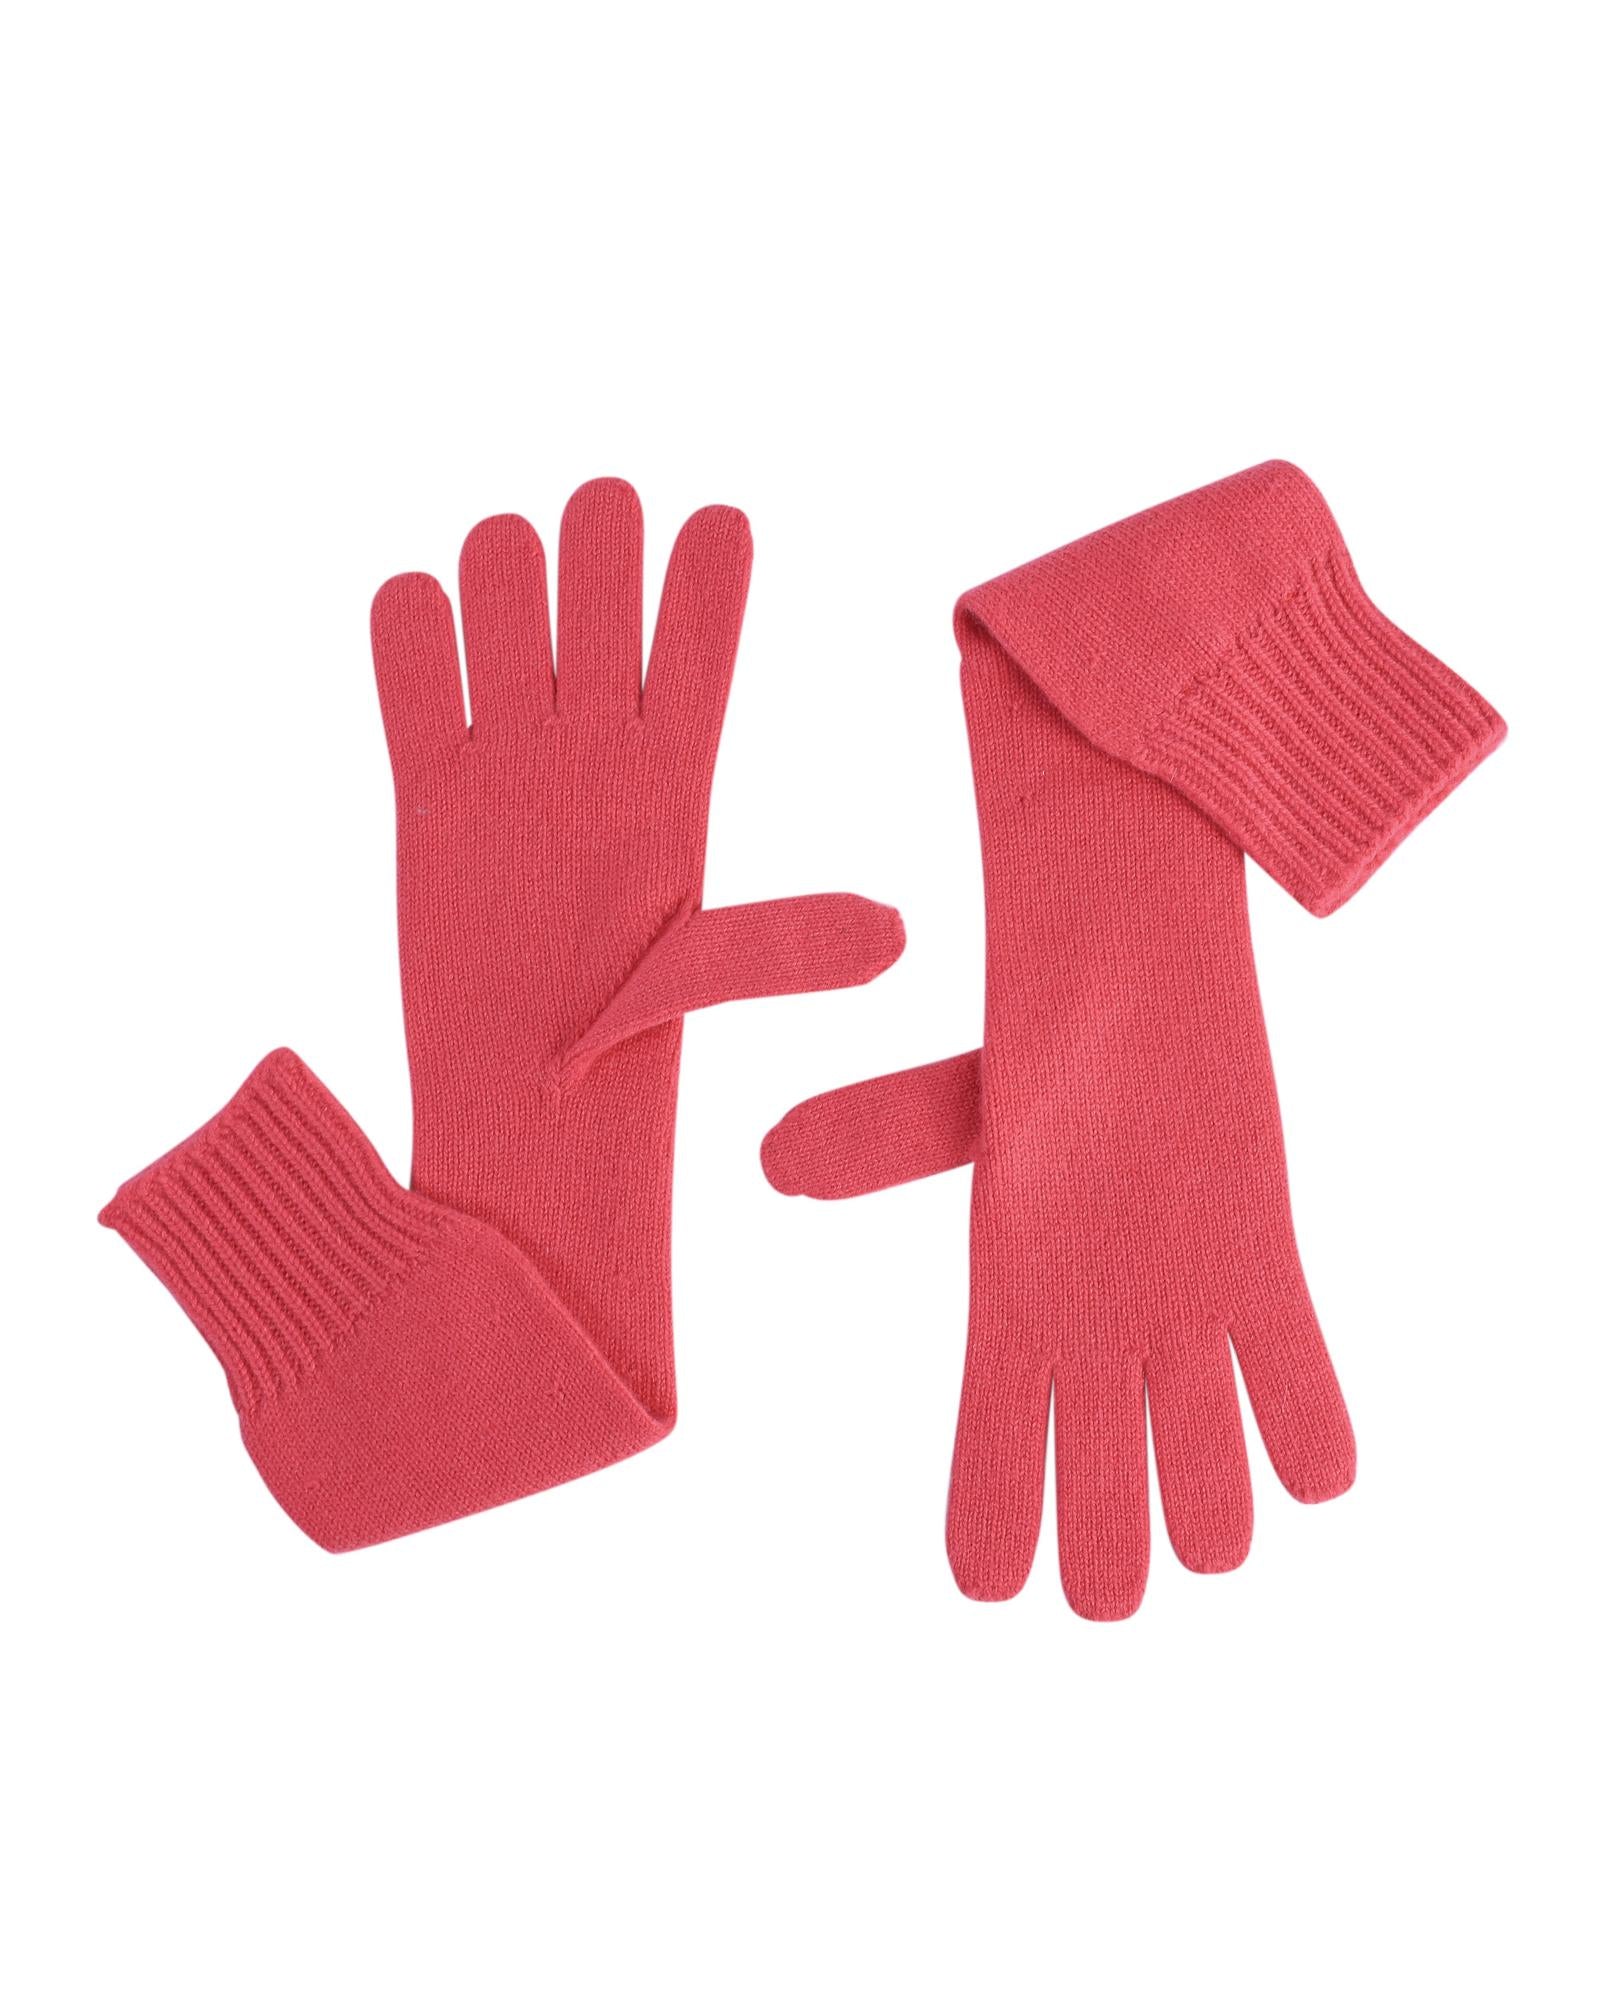 Exquisite Cashmere Womens Long Gloves - M